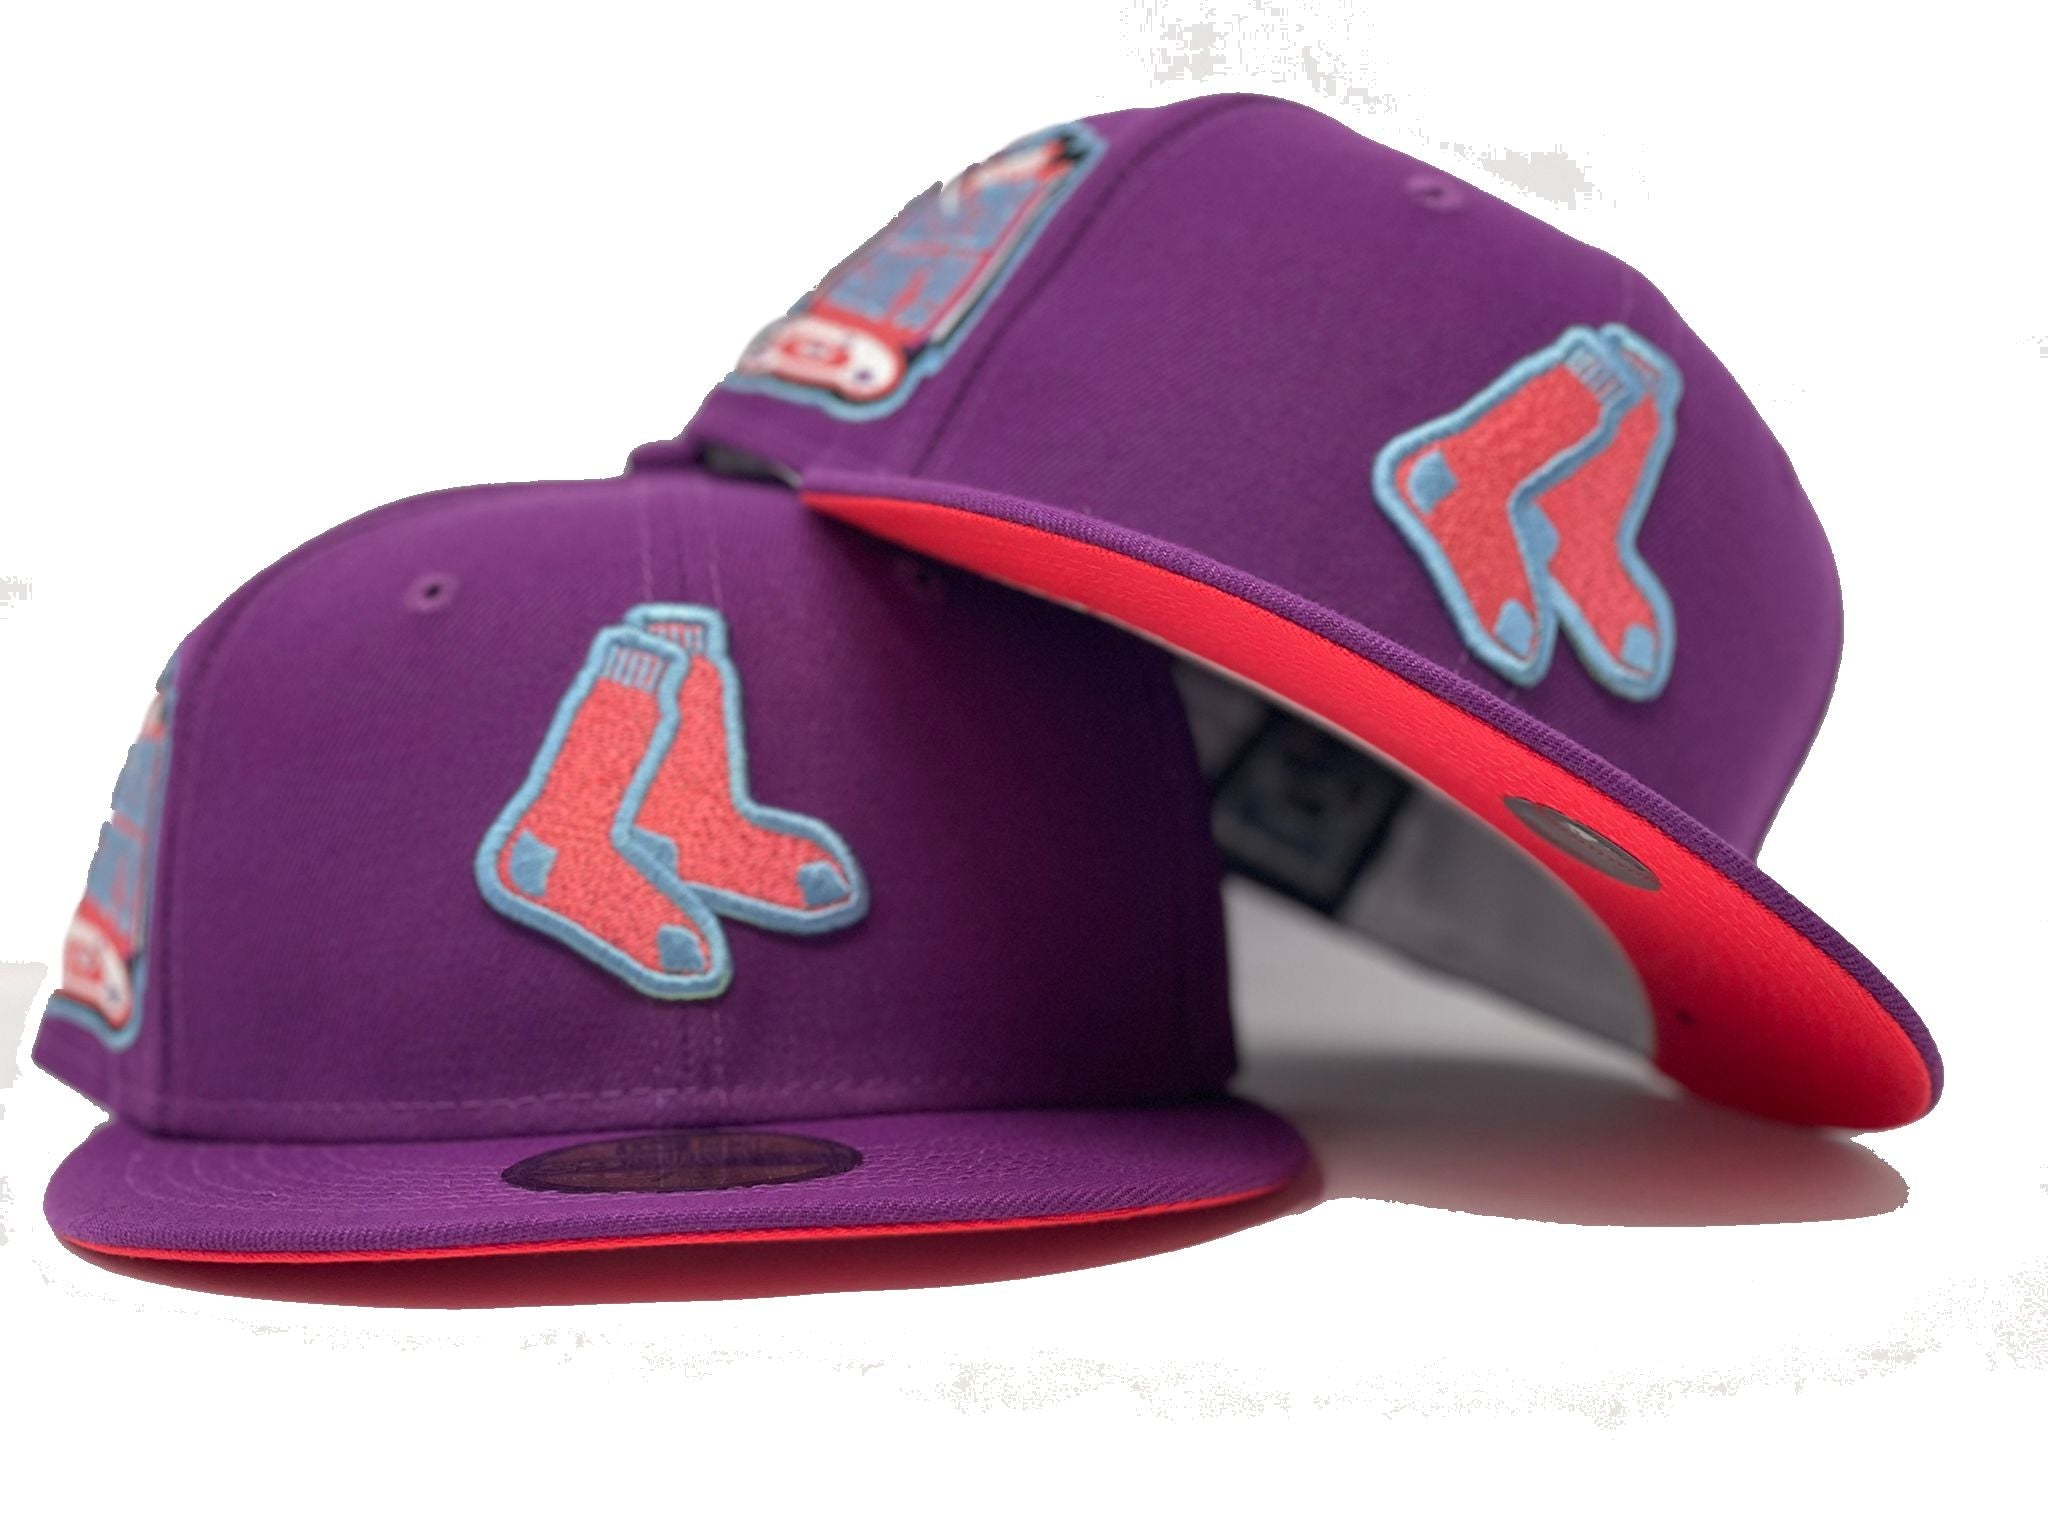 MLB Boston Red Sox All Star Game Sure Shot Snapback - reconzrh